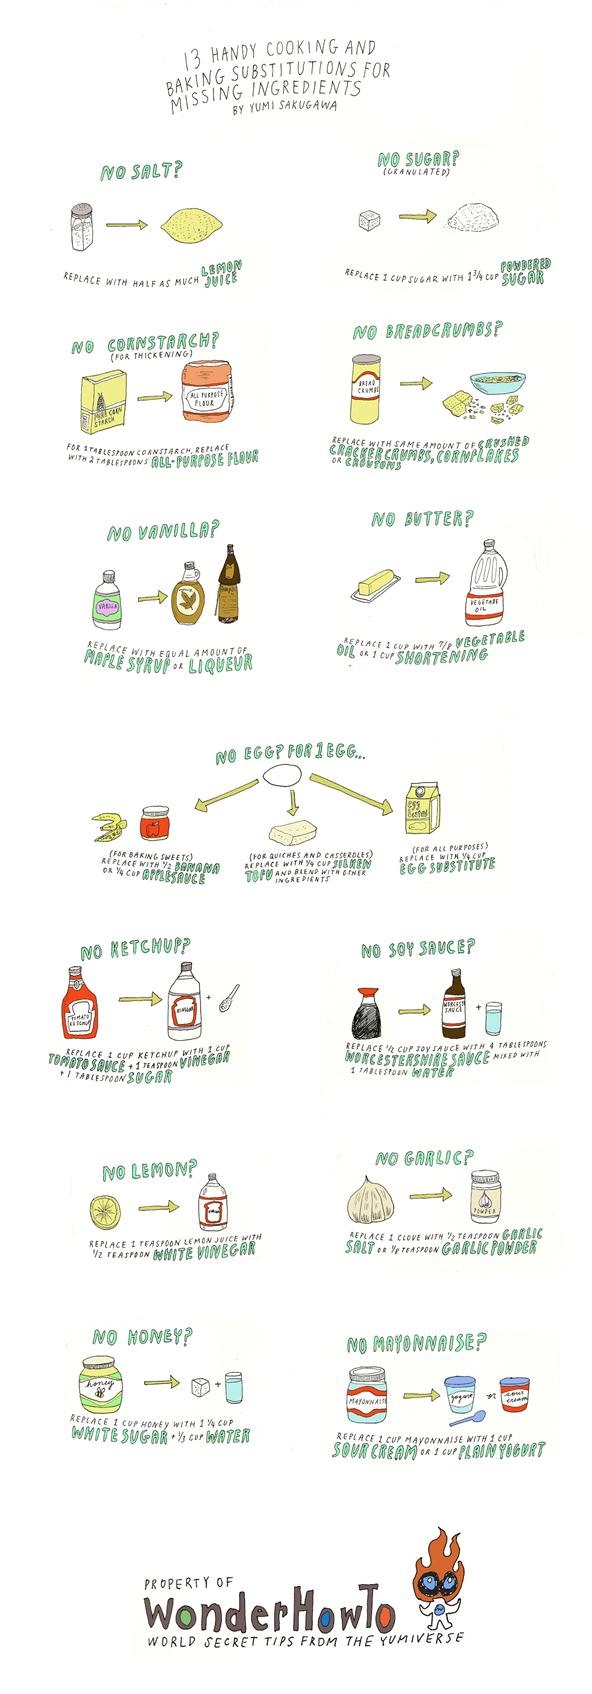 13 Handy Cooking and Baking Substitutions for Missing Ingredients